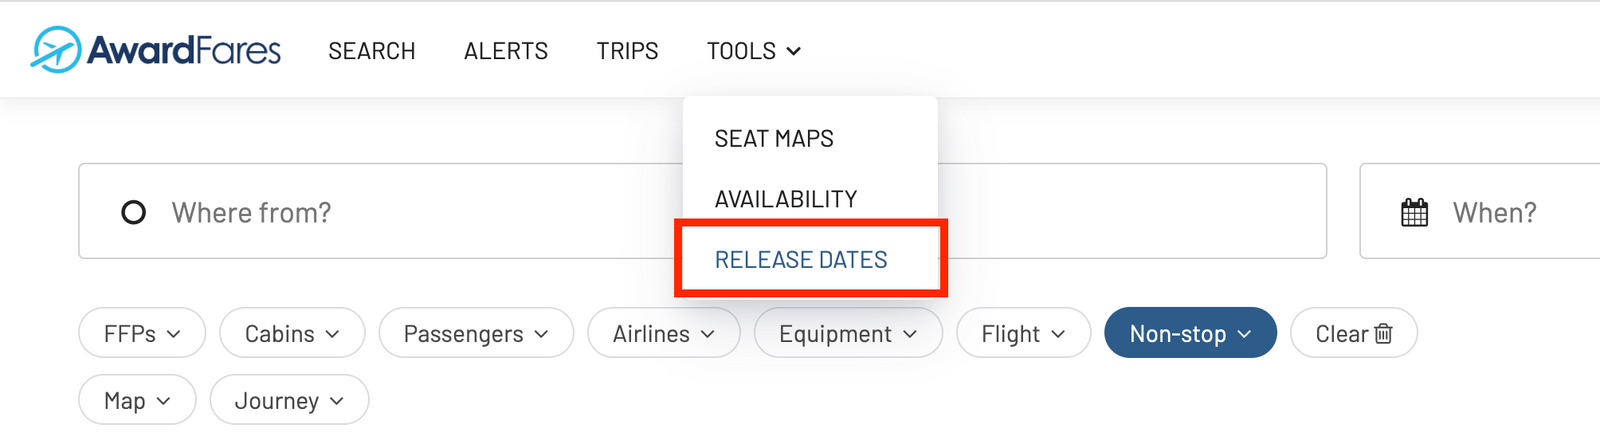 AwardFares new features May 2022 - Award Release Dates